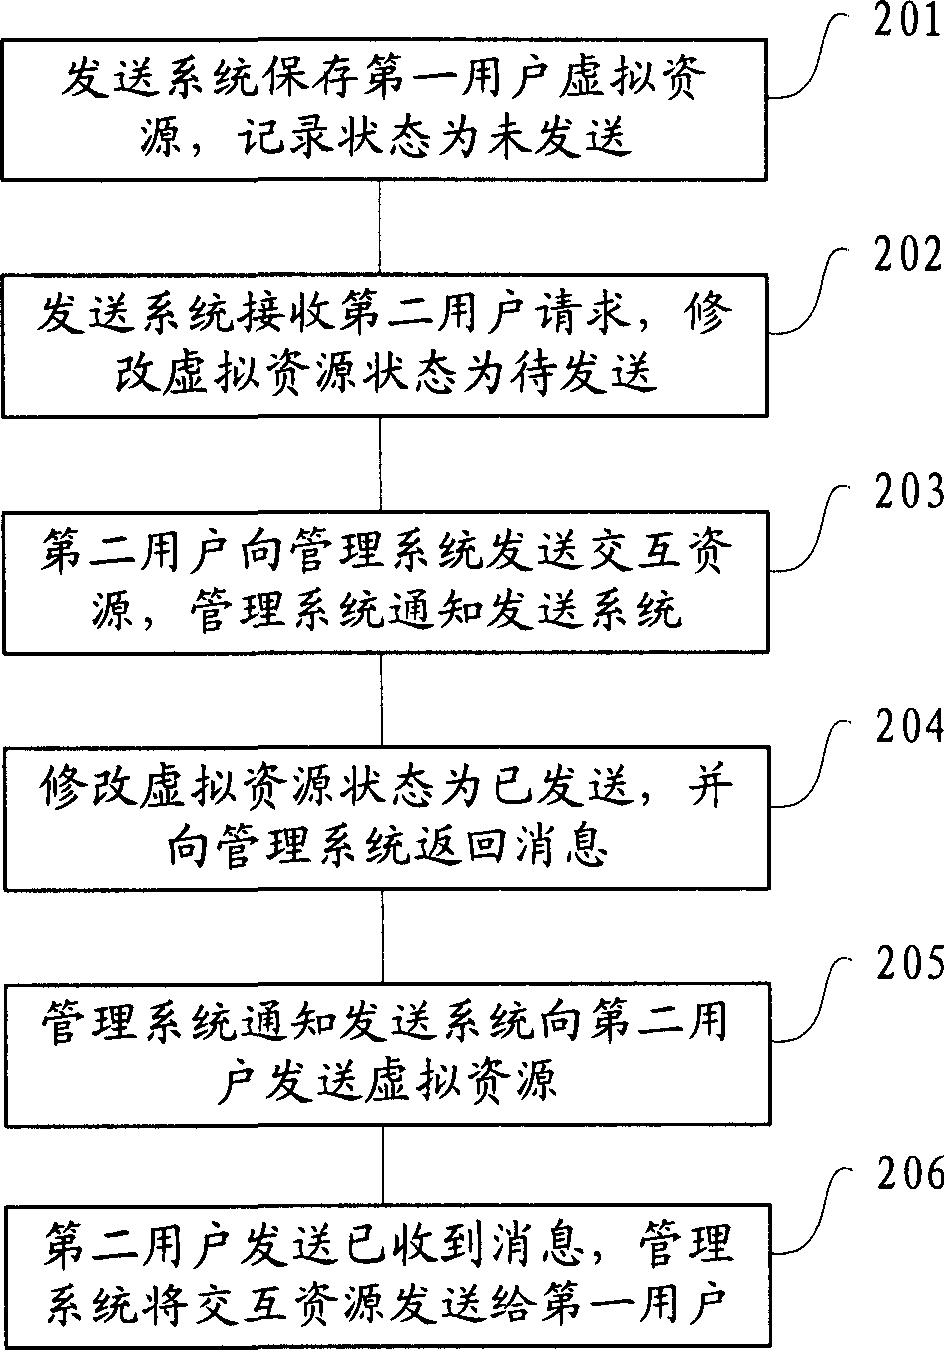 Method and system for automatically sending dummy resource